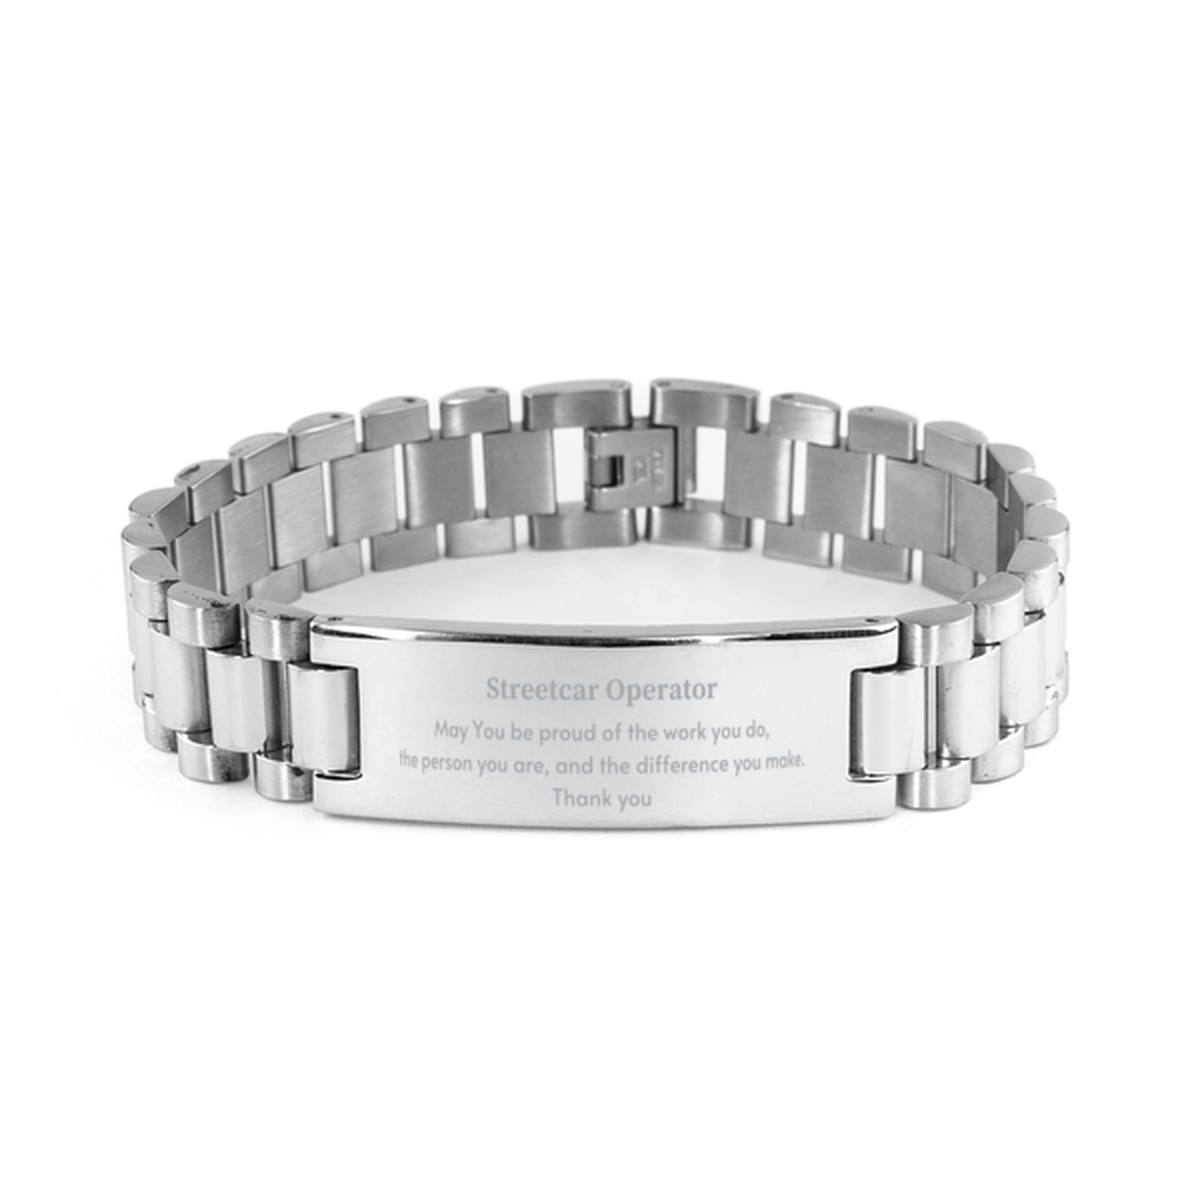 Heartwarming Ladder Stainless Steel Bracelet Retirement Coworkers Gifts for Streetcar Operator, Streetcar Operator May You be proud of the work you do, the person you are Gifts for Boss Men Women Friends